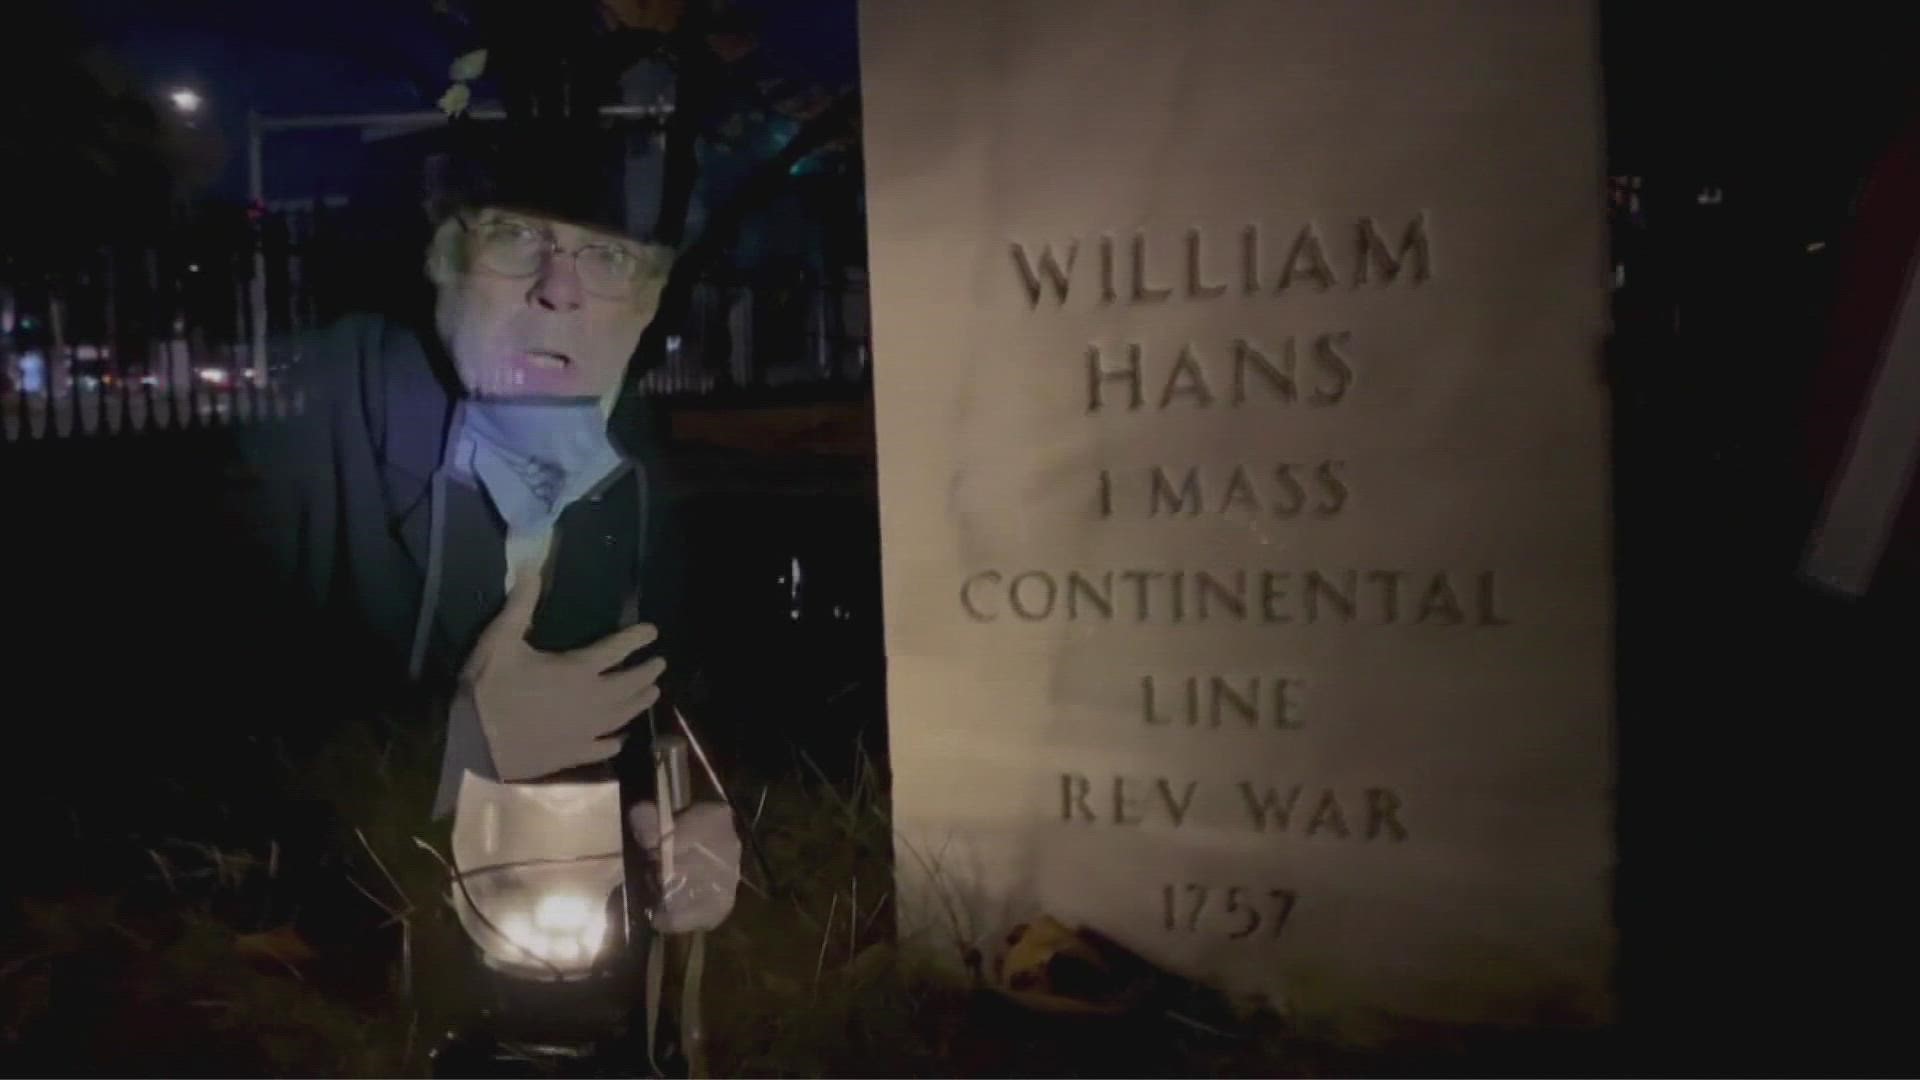 The 'Walk Among The Shadows' tour brings spirits to life in Portland's Eastern Cemetery.